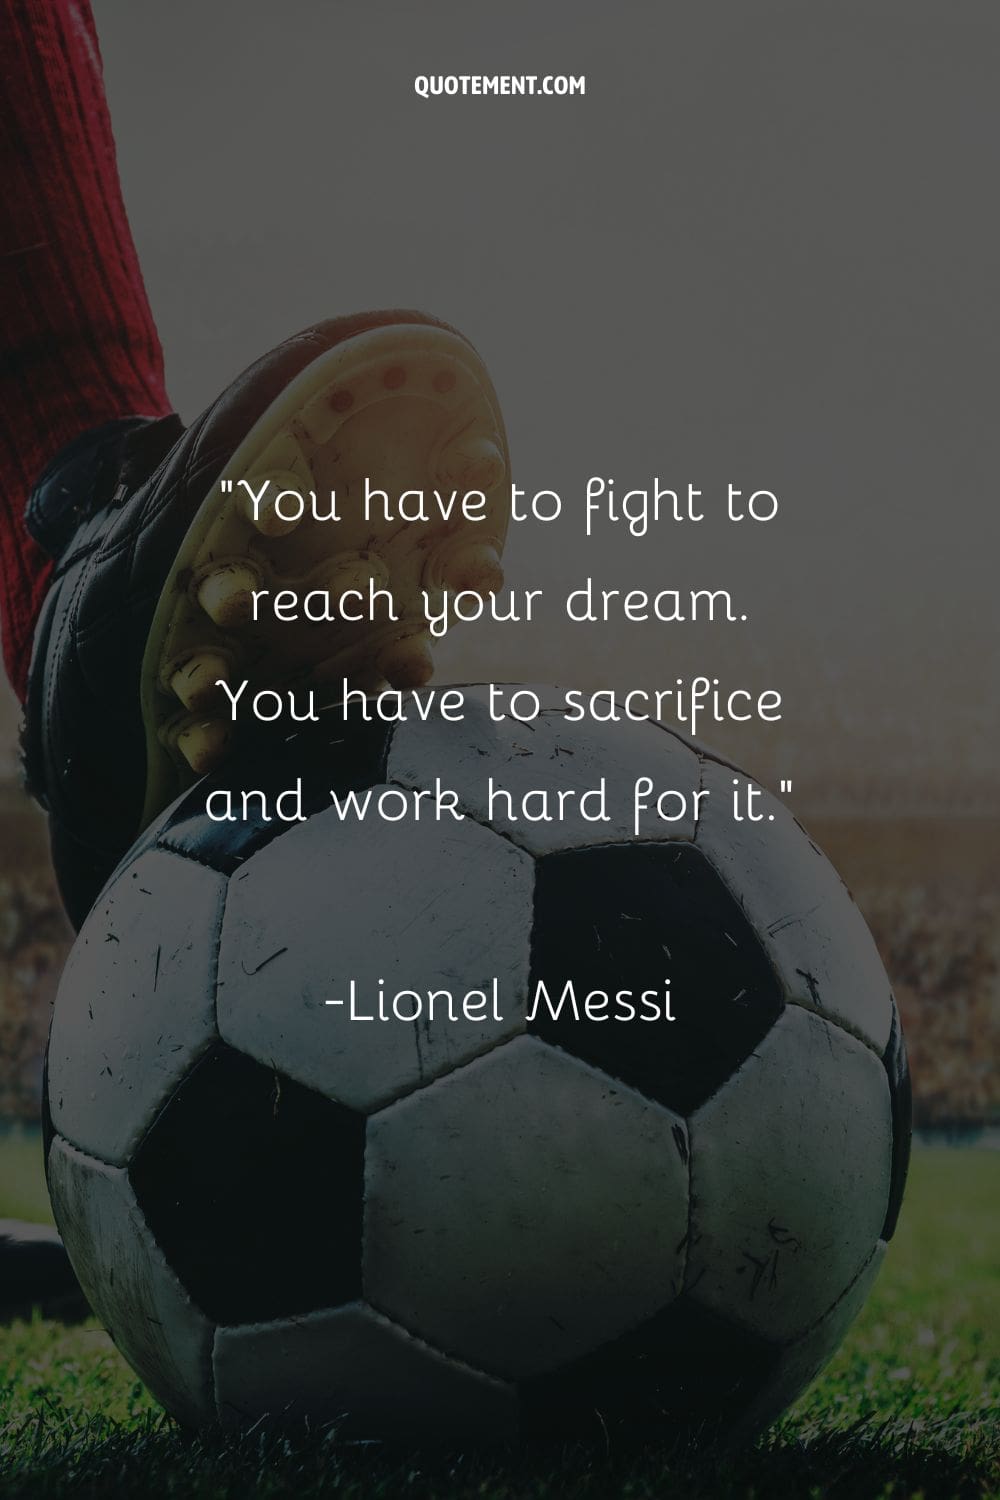 player with black cleats representing famous soccer quote